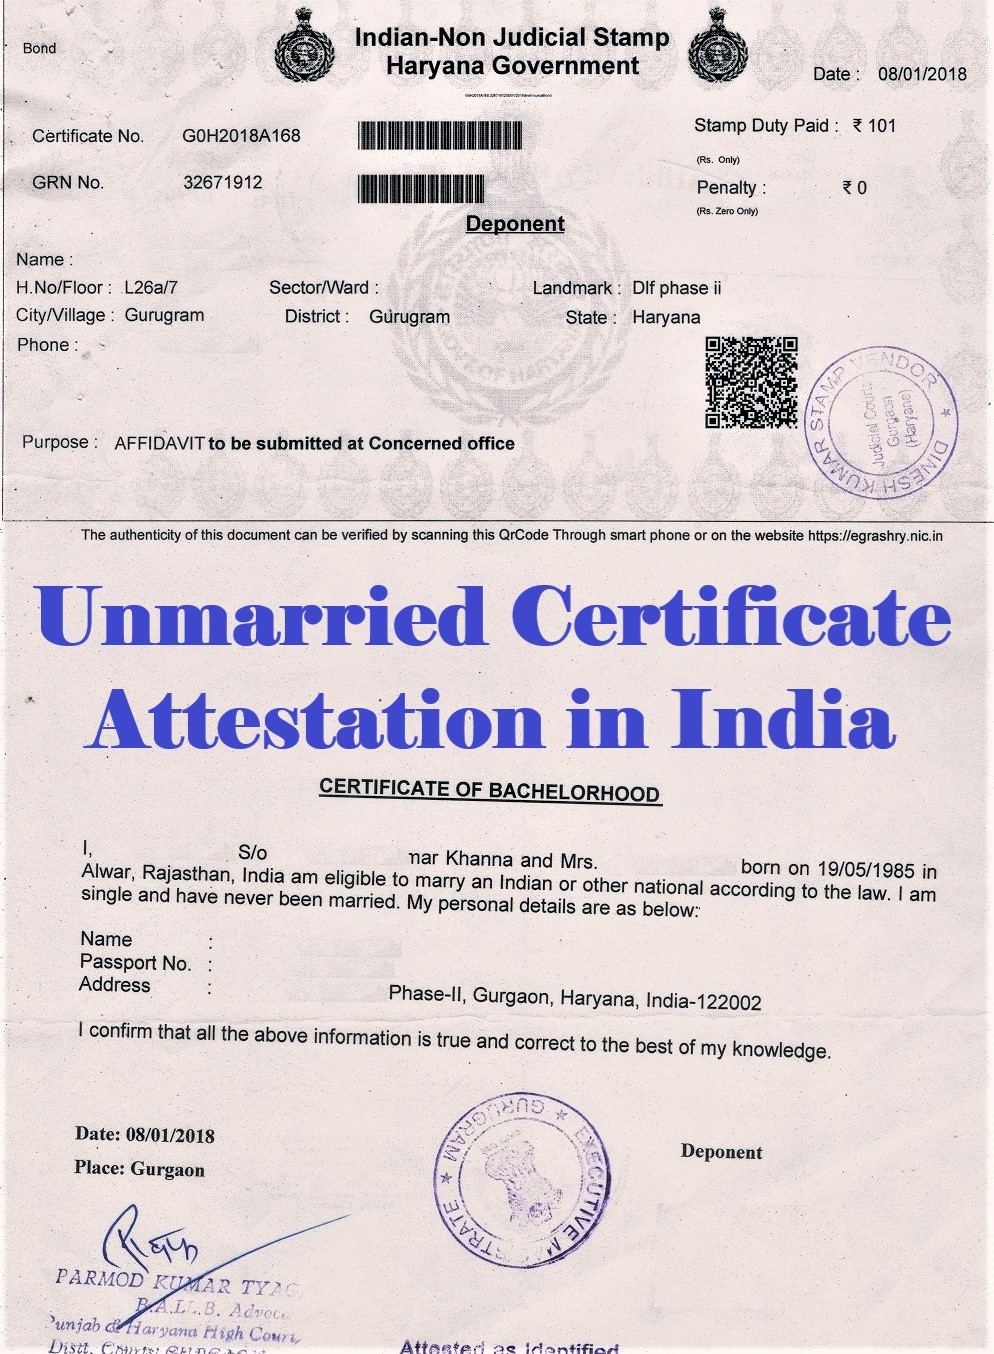 Unmarried Certificate Attestation from Ivory Cost Embassy